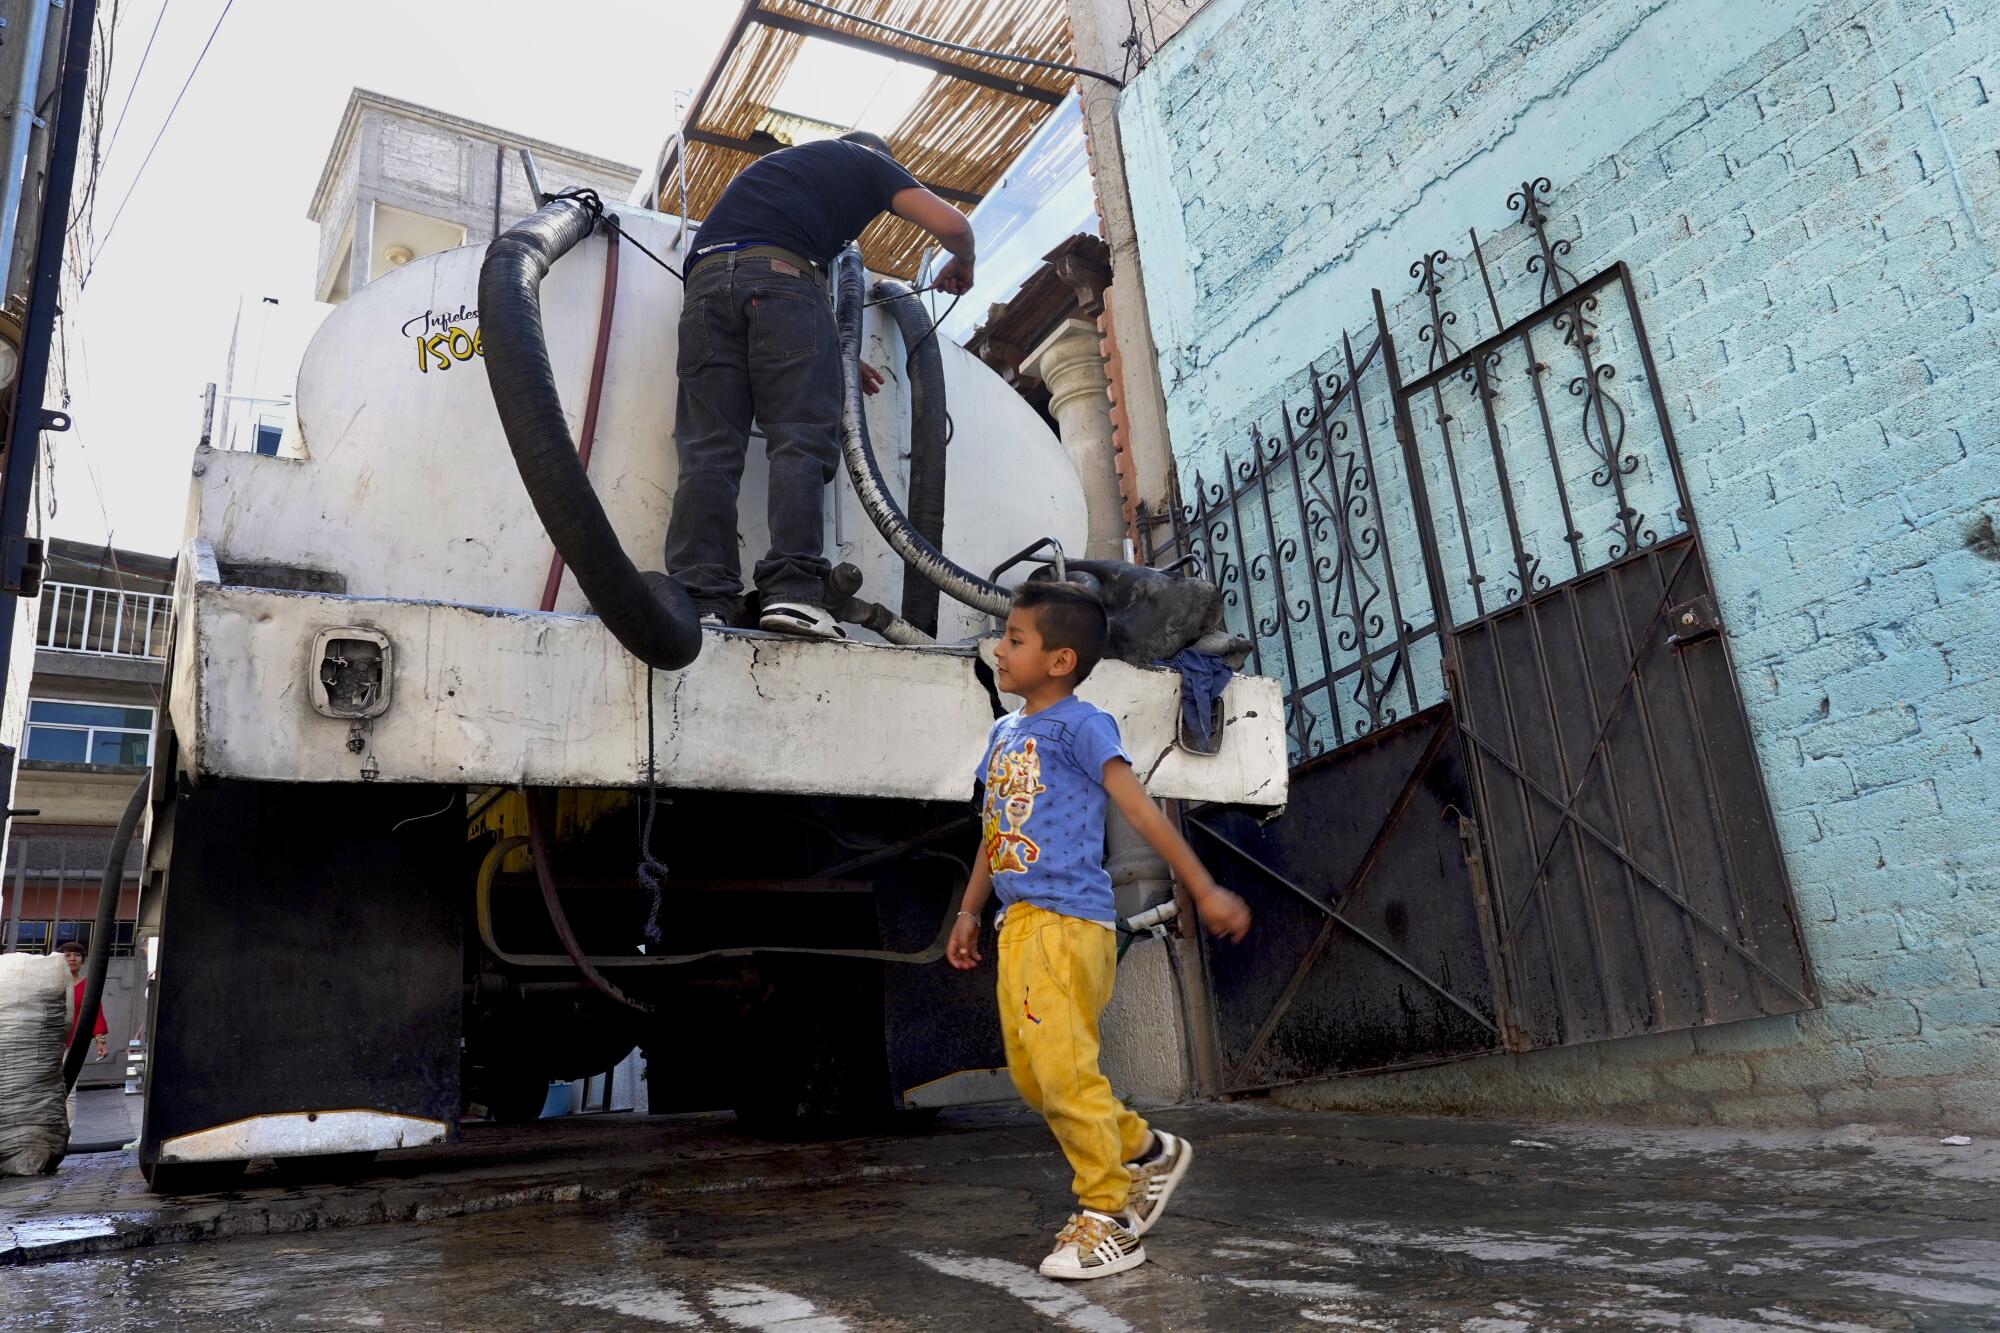 A man stands on a water tanker as a 5-year-old boy walks behind it.